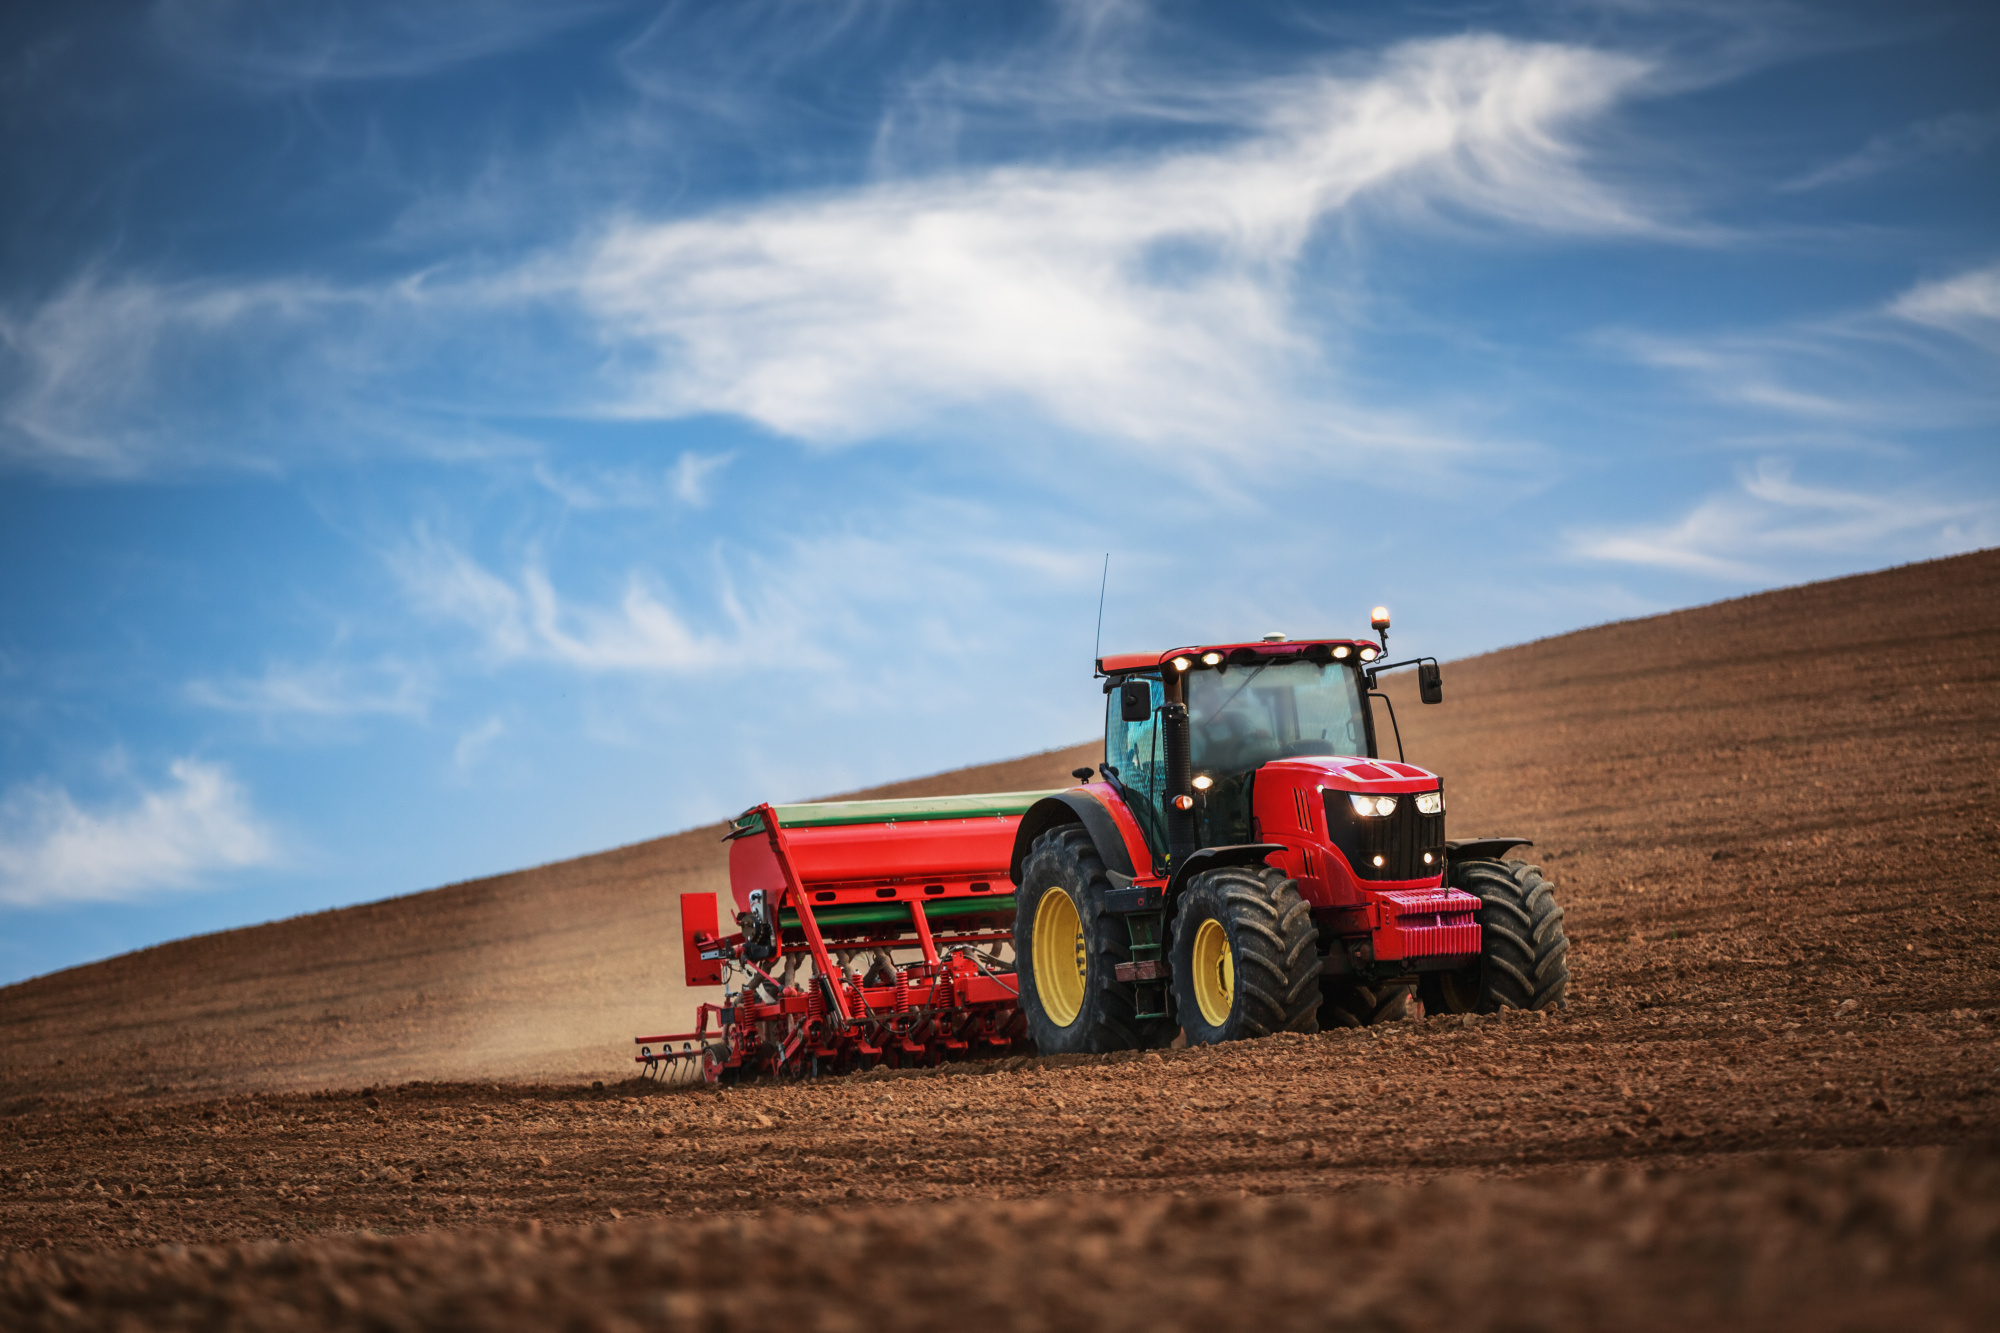 heavy-duty agriculture equipment using variable ratio transmissions